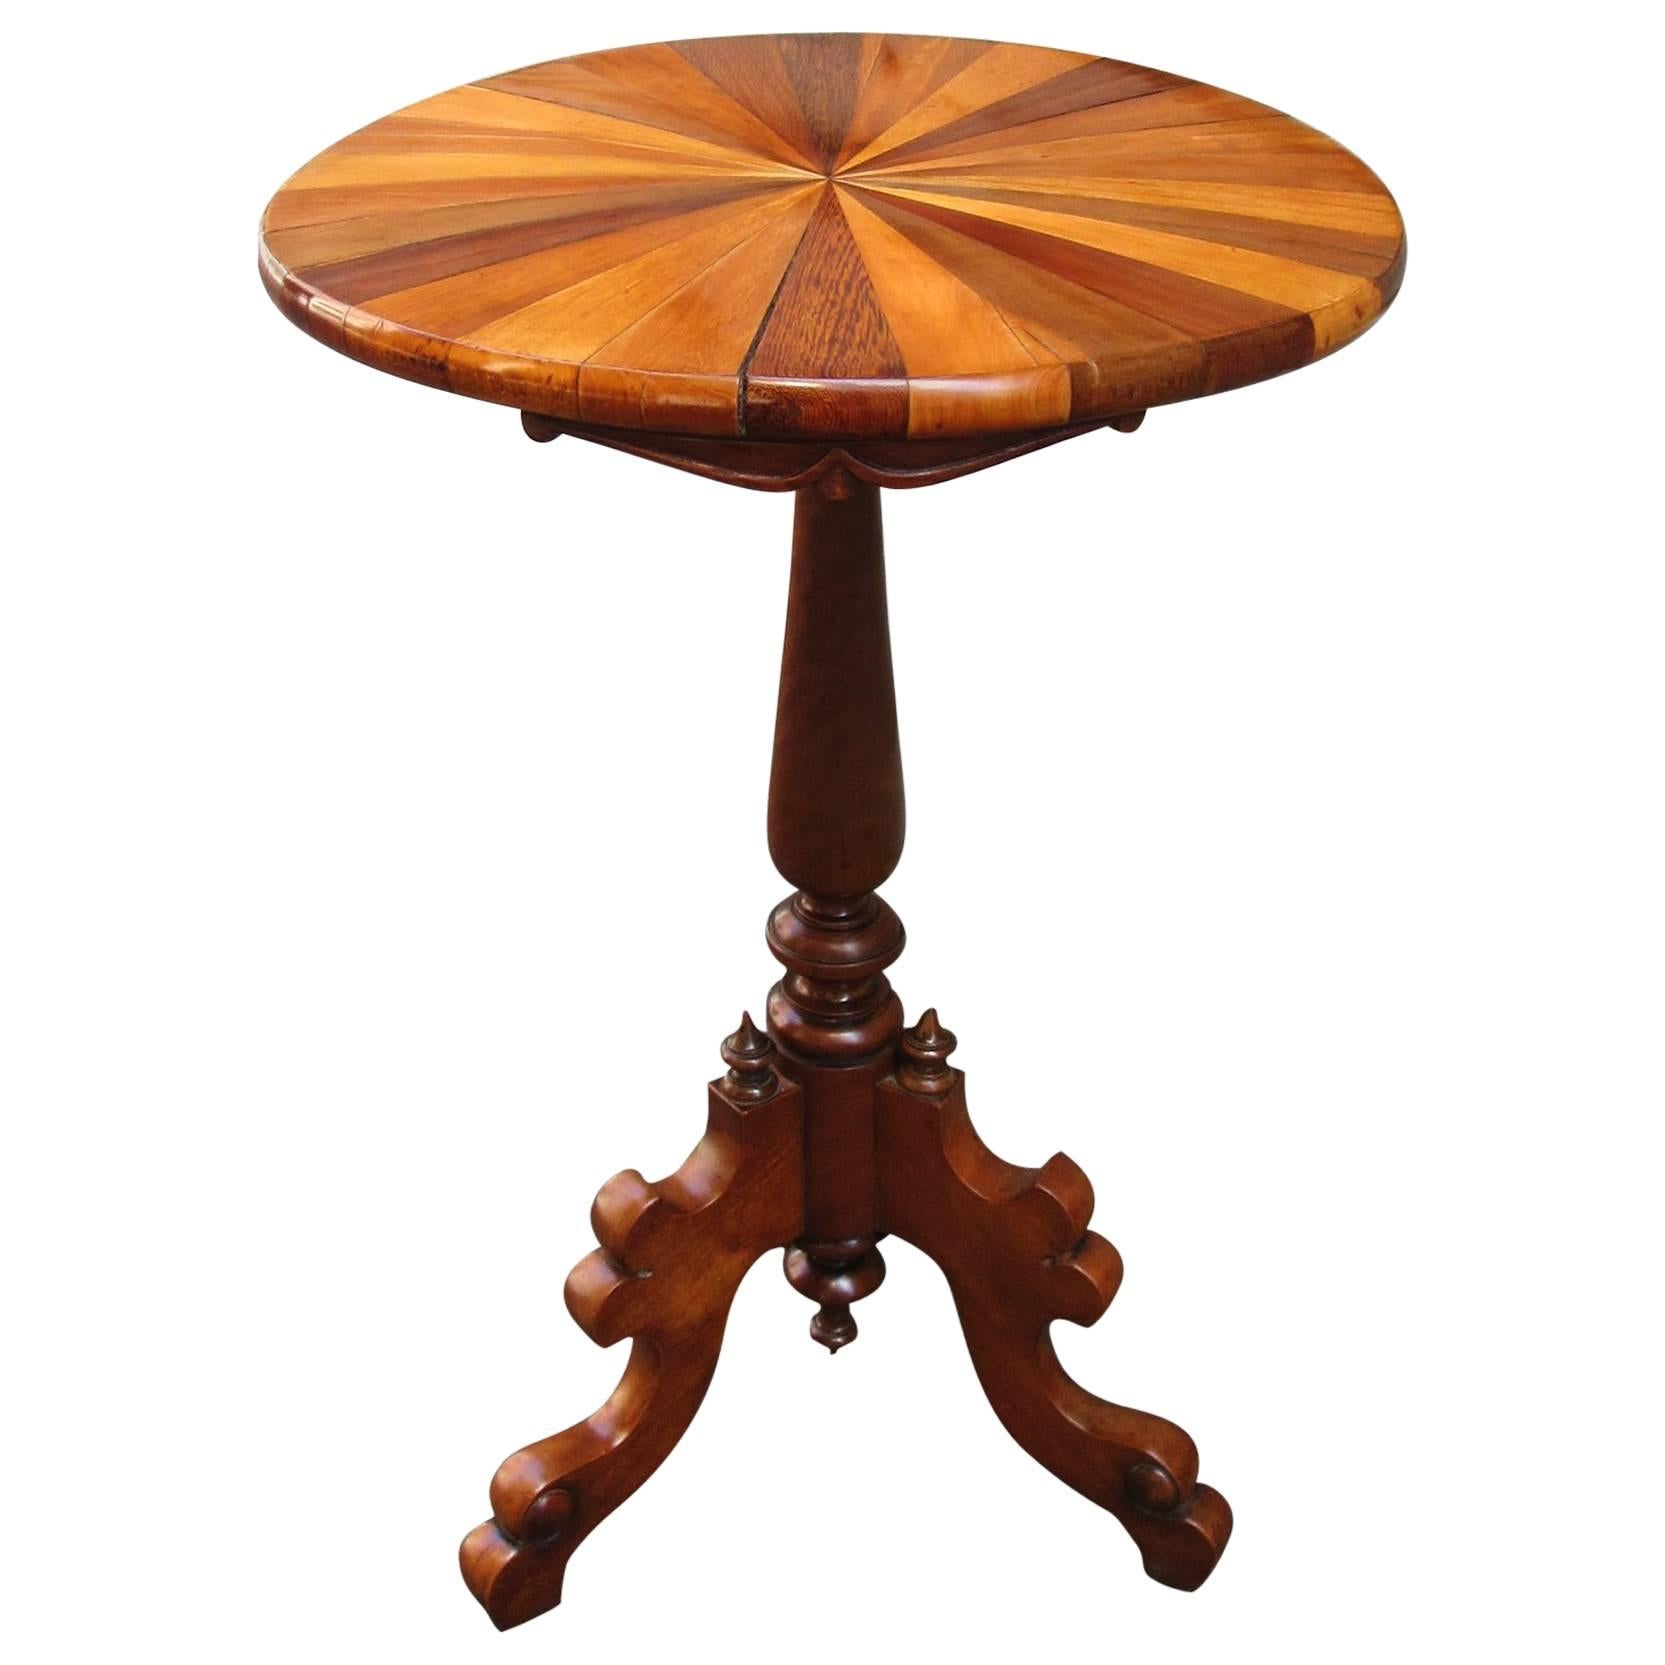 19th Century Tobagonian Specimen Wood Tripod Table Made for 1885 Exhibit